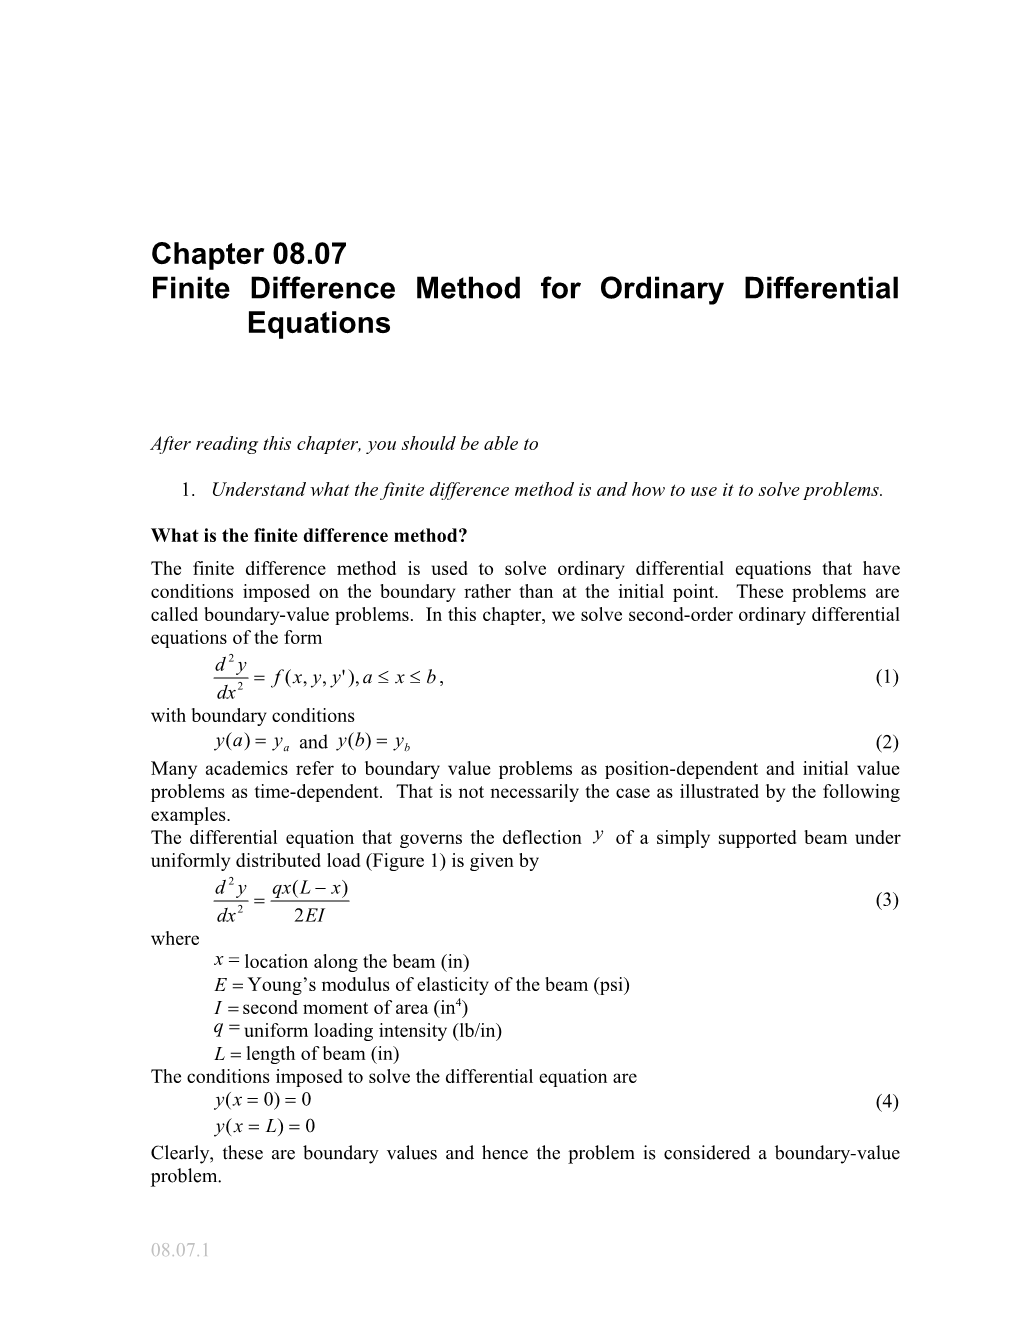 Finite Difference Method for Solving Differential Equations